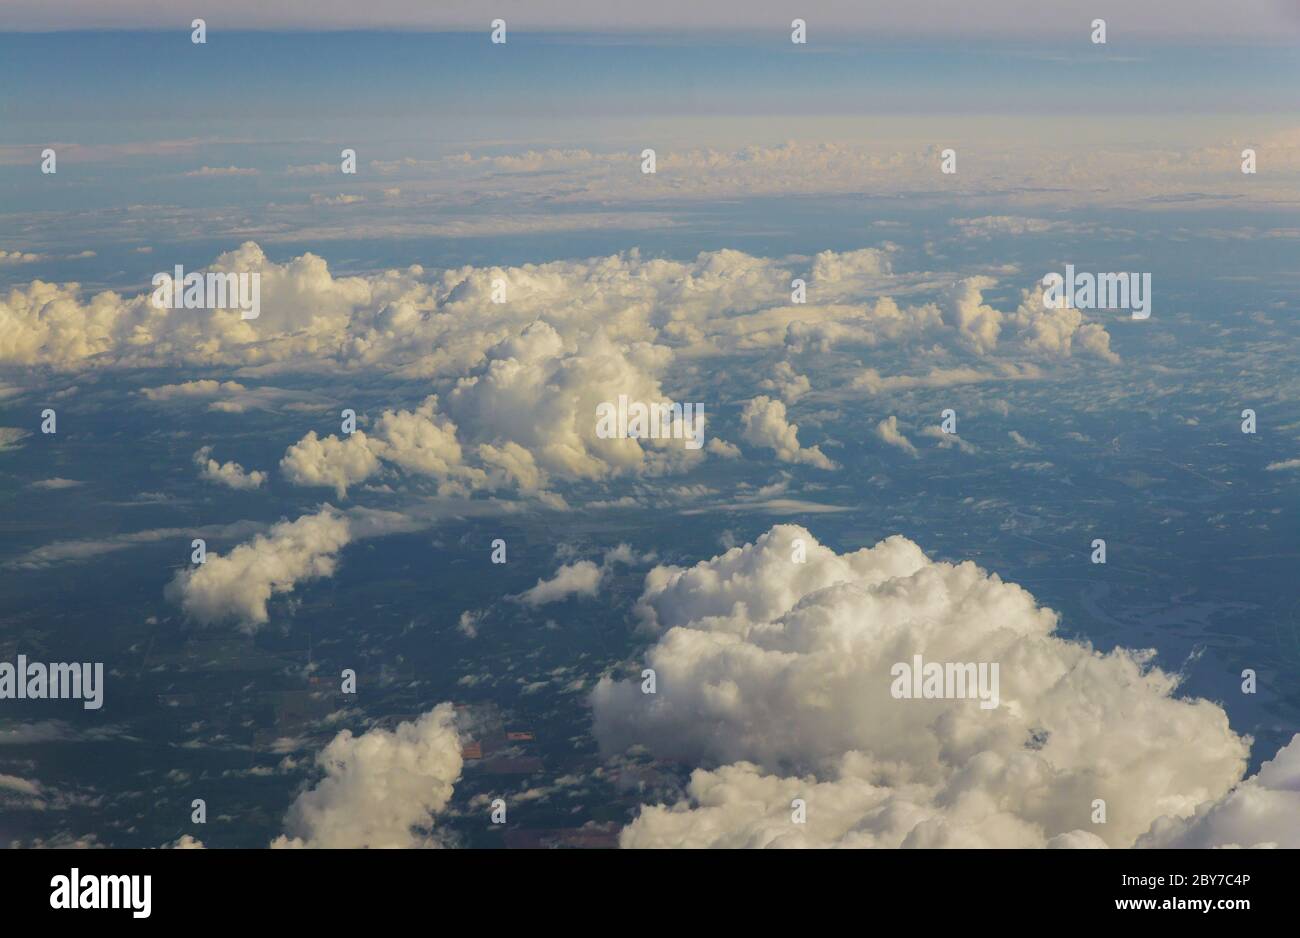 Cloud top aerial view of blue sky beautiful natural landscape from airplane window. Stock Photo